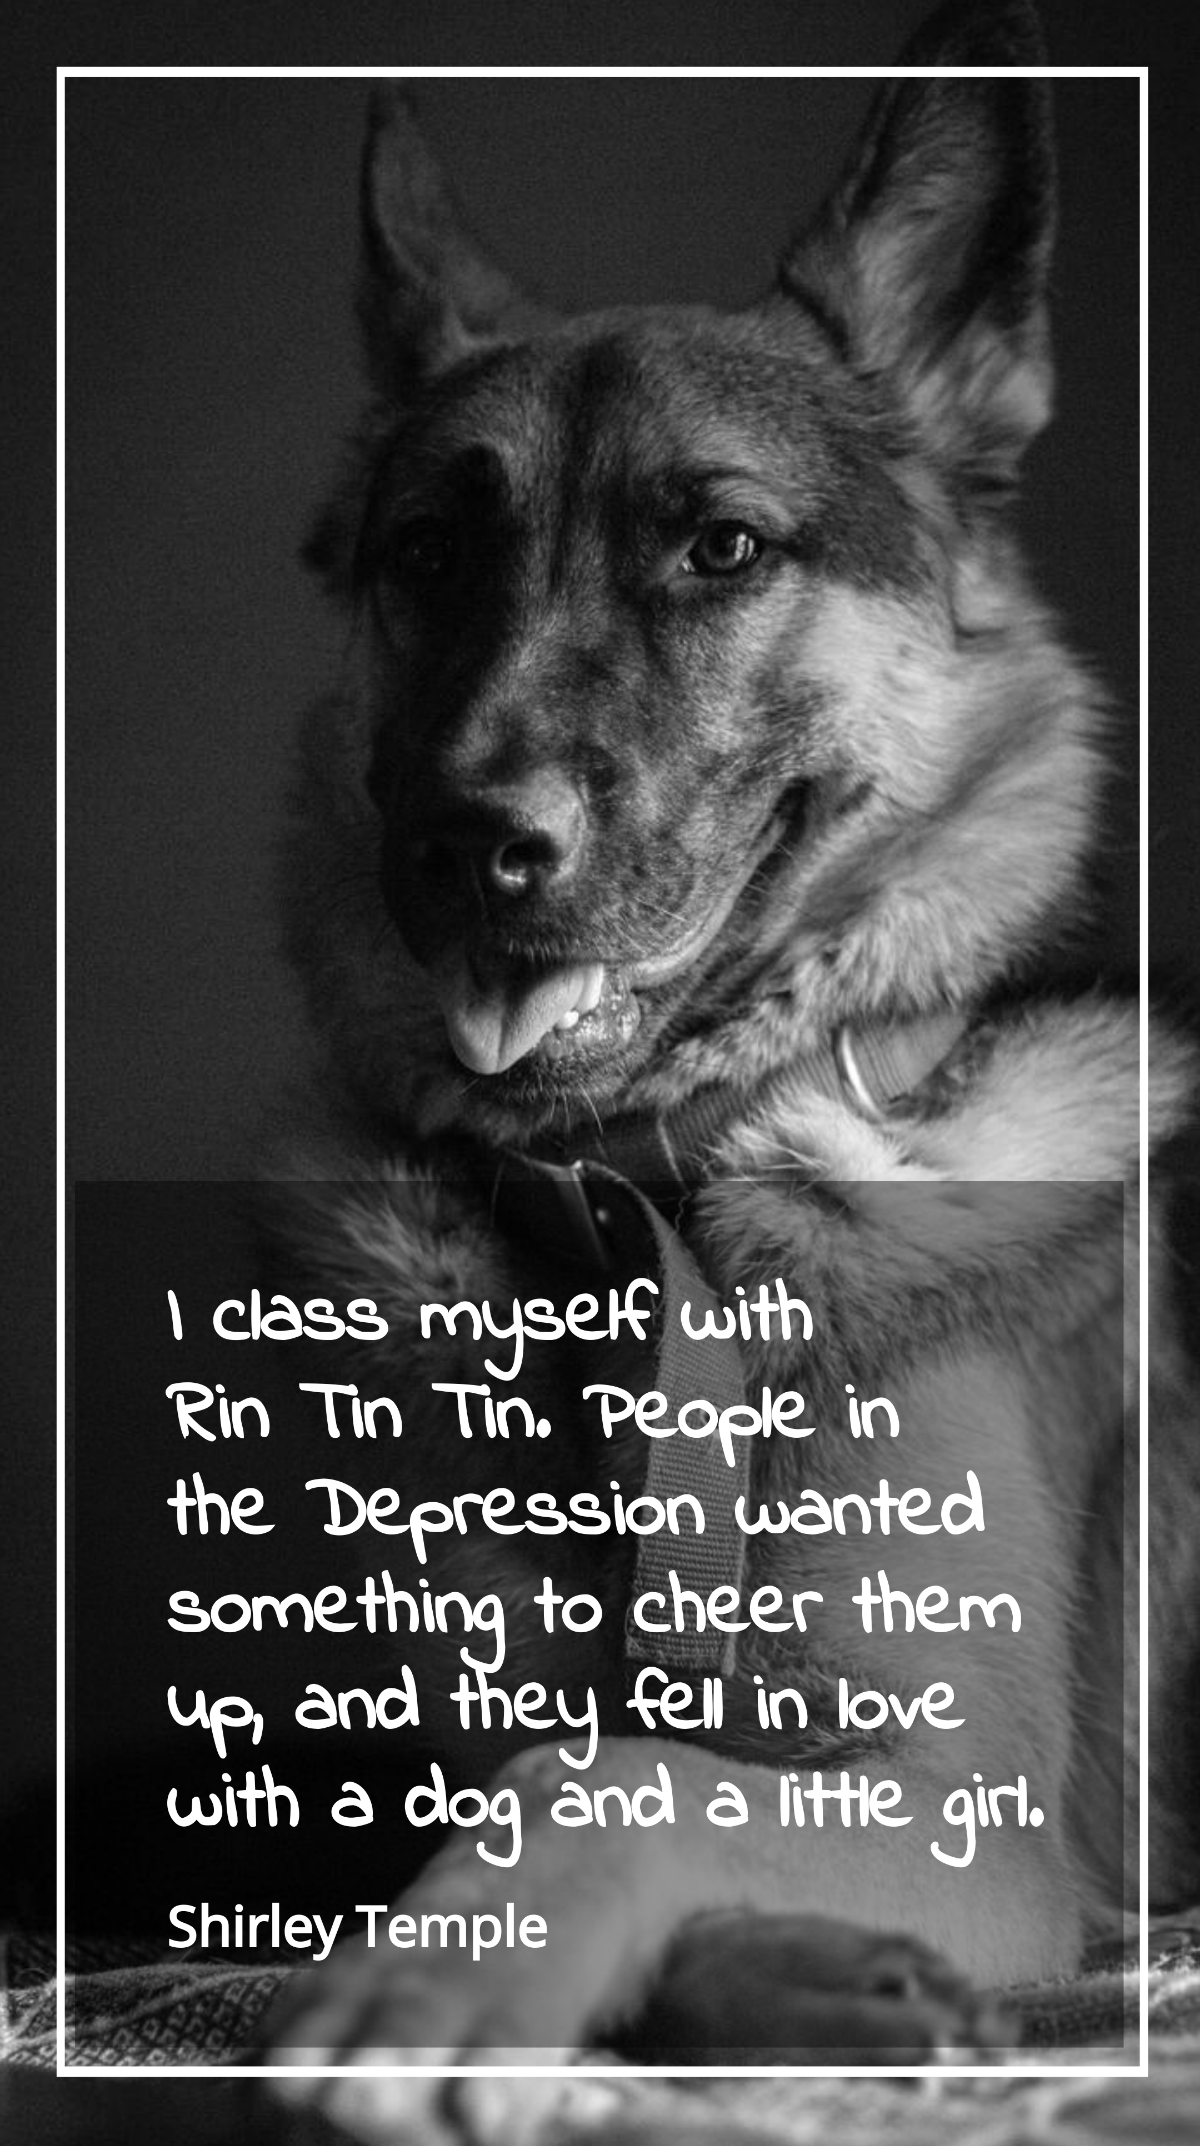 Shirley Temple - I class myself with Rin Tin Tin. People in the Depression wanted something to cheer them up, and they fell in love with a dog and a little girl. Template